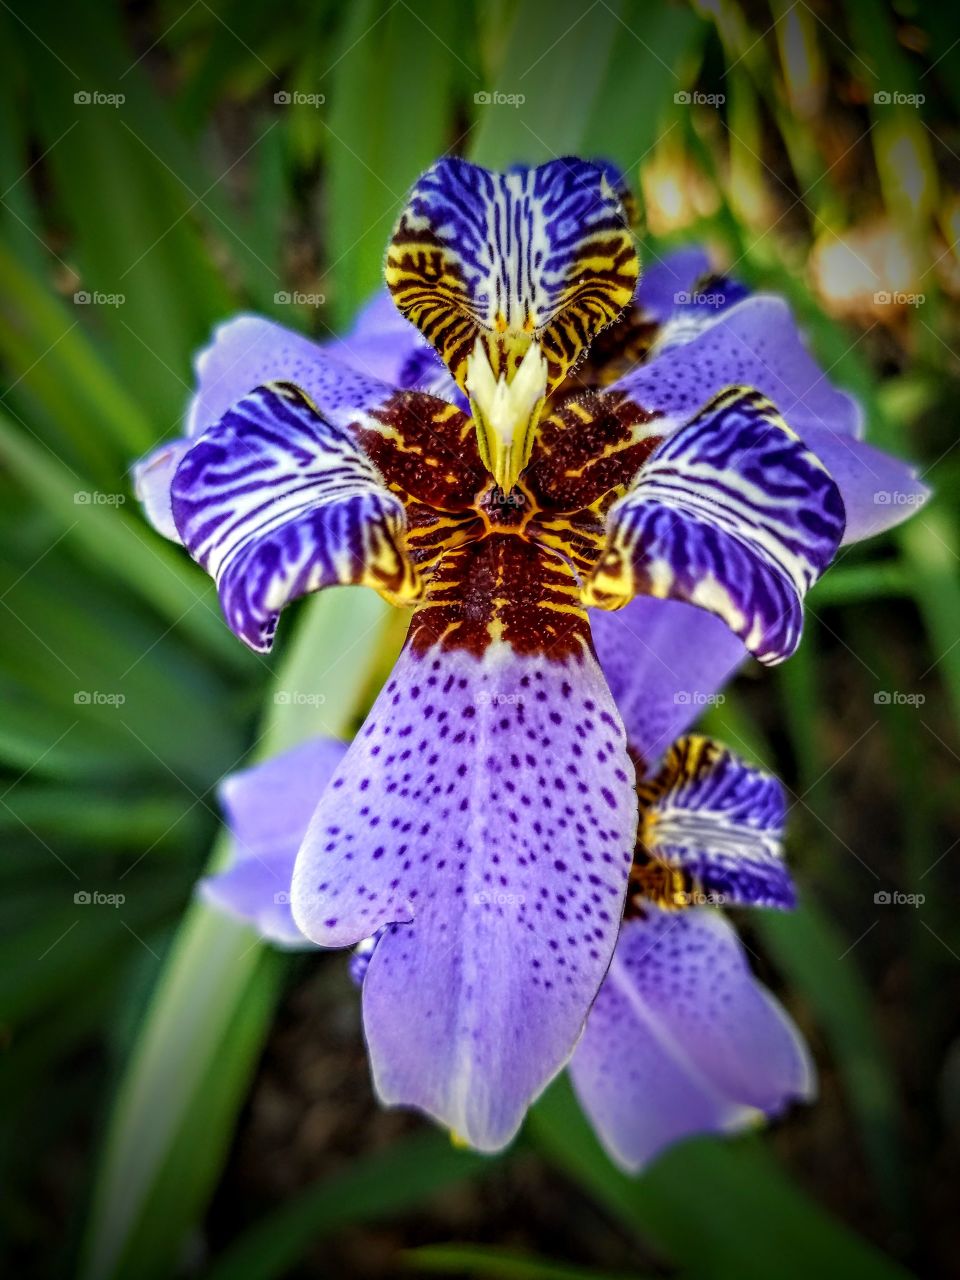 close-up of a bright blue, lavender or lilac colored iris flower with yellow center on a sunny green garden